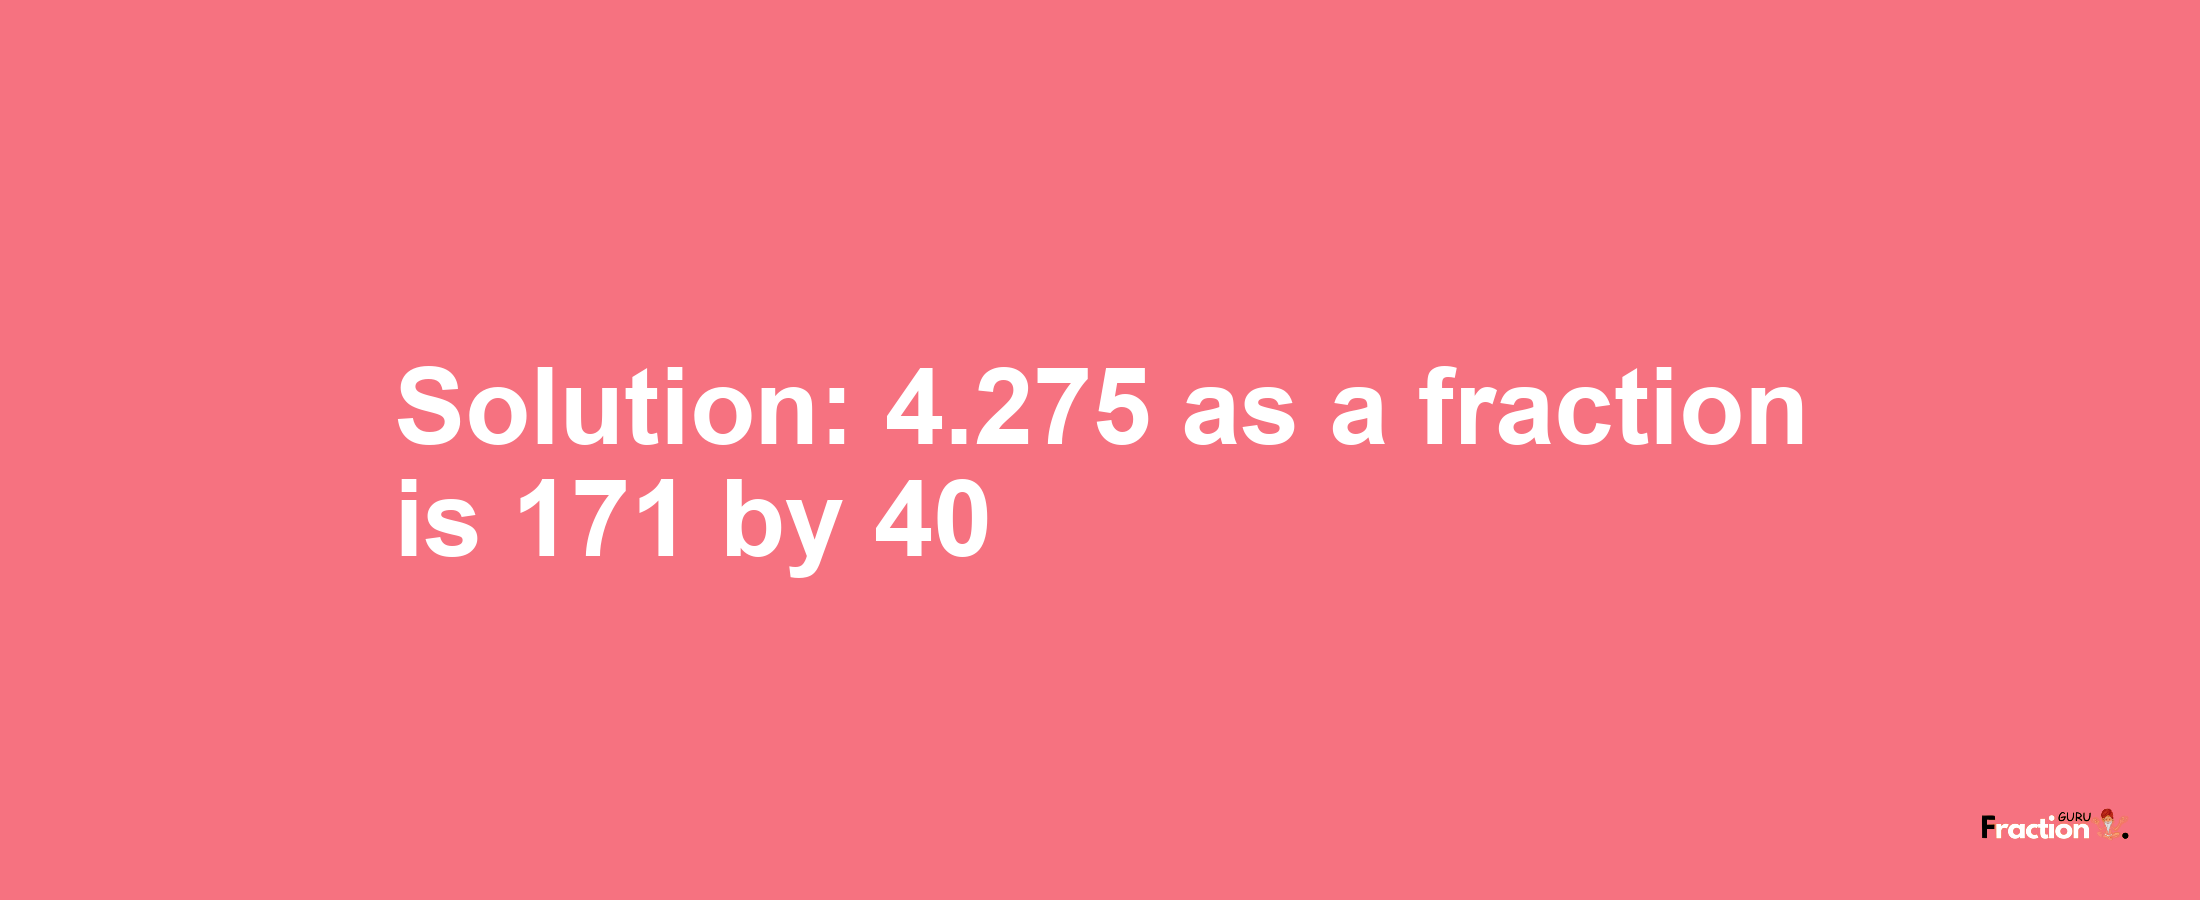 Solution:4.275 as a fraction is 171/40